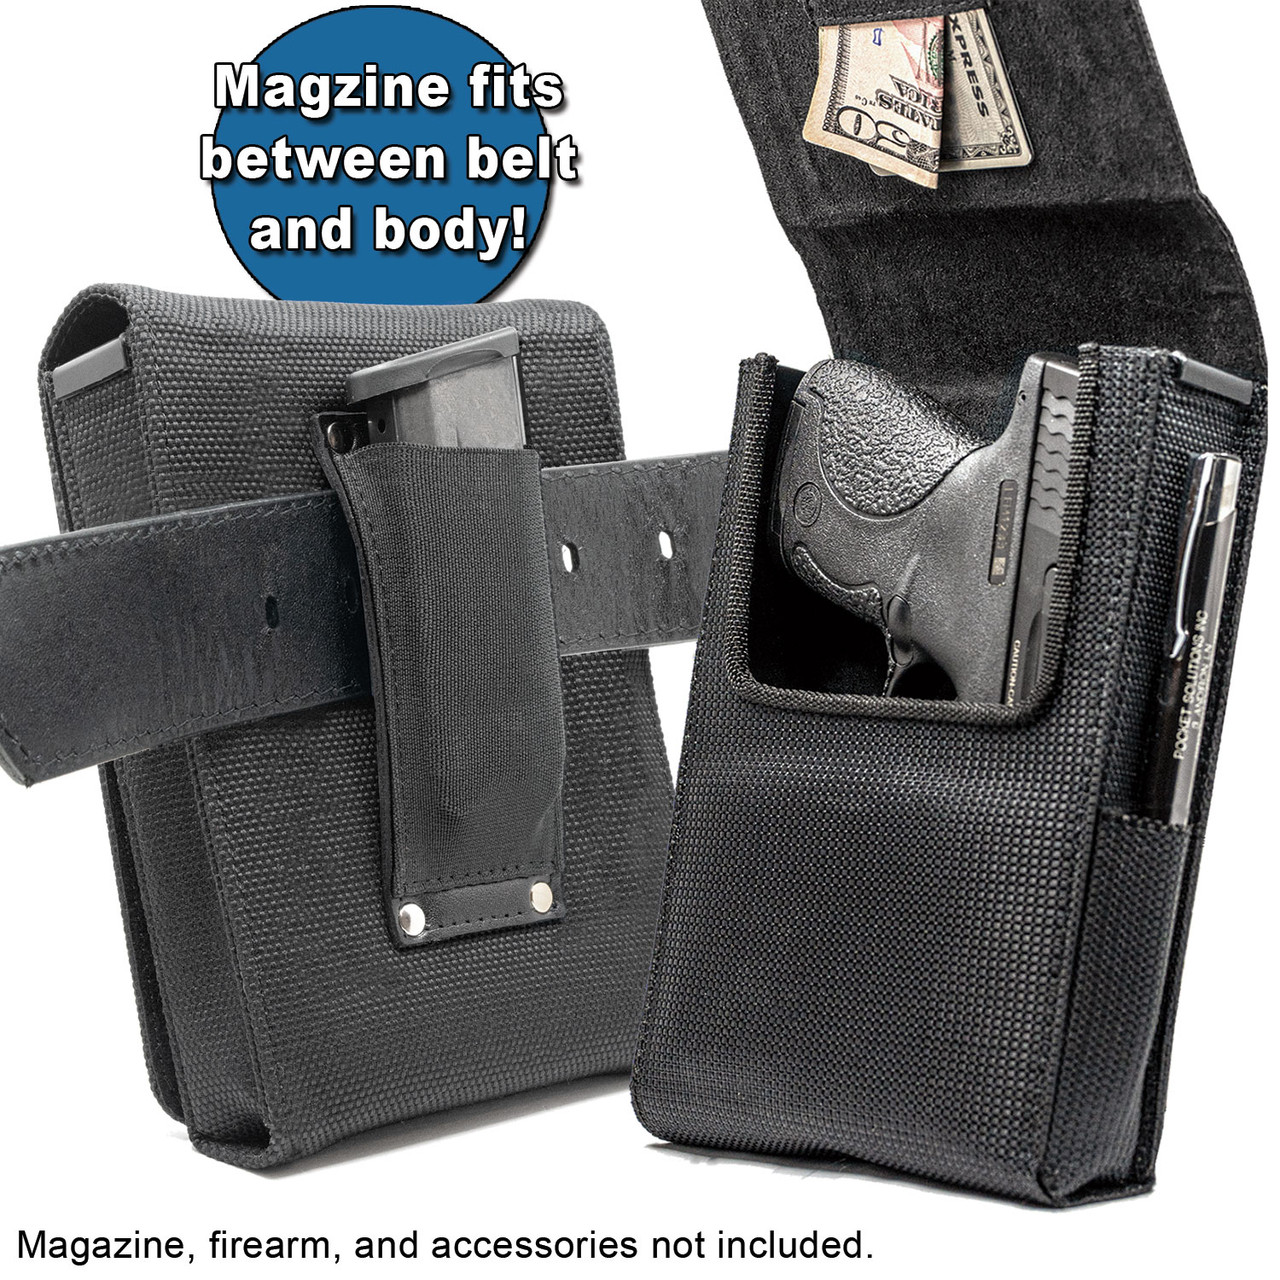 The Ruger LC9 Max Defense Holster